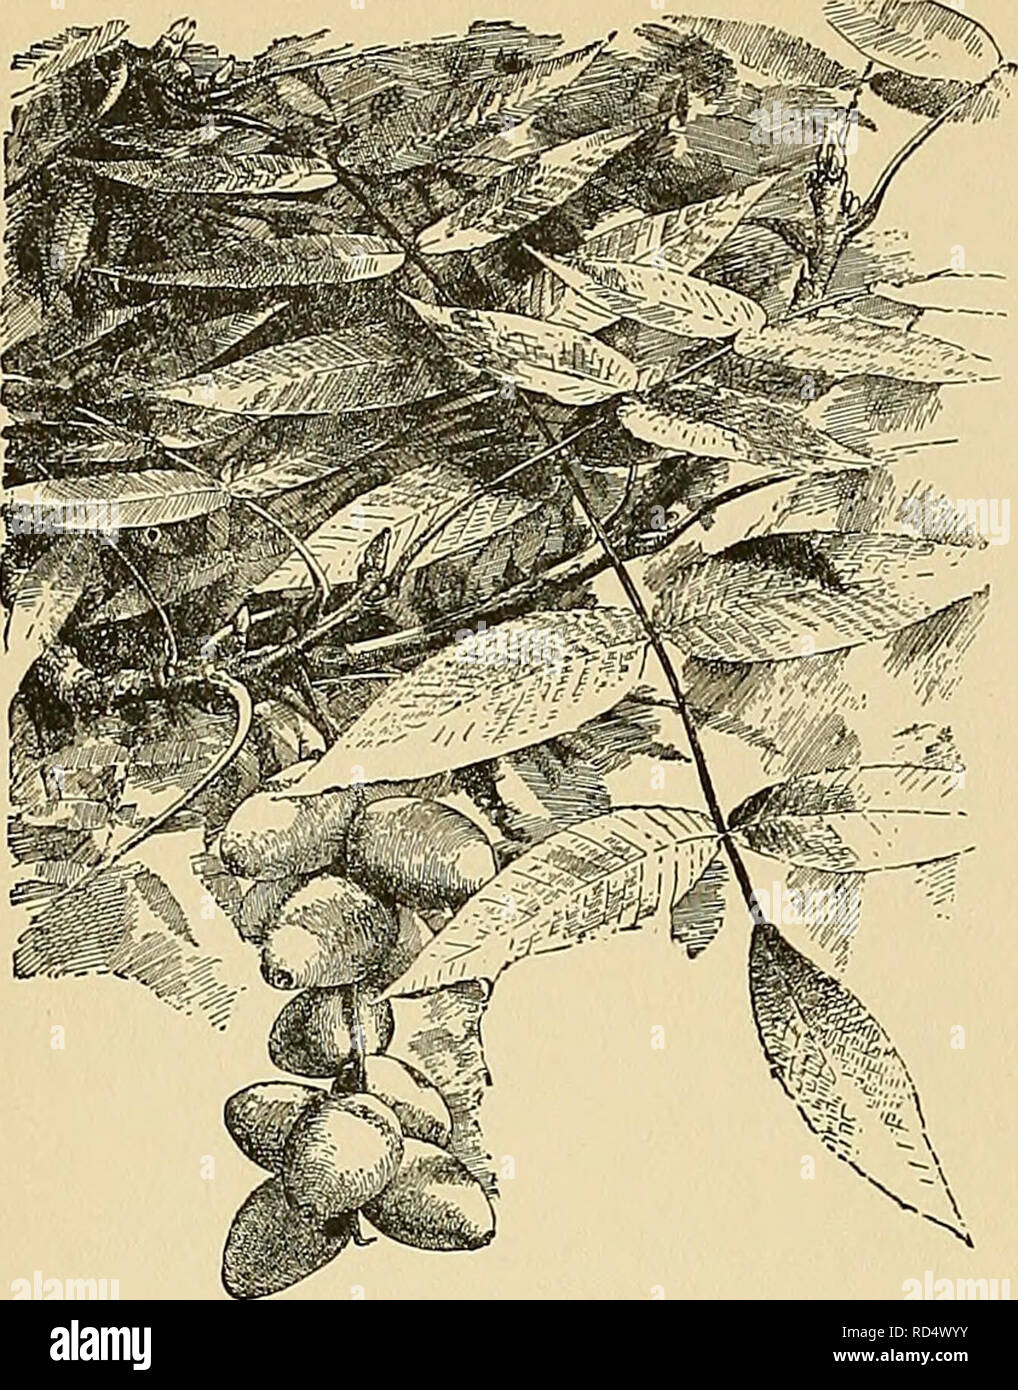 . Cyclopedia of American horticulture, comprising suggestions for cultivation of horticultural plants, descriptions of the species of fruits, vegetables, flowers, and ornamental plants sold in the United States and Canada, together with geographical and biographical sketches. Gardening. 846 JUGLANS JUGLANS. 1196. Juelans Sieboldiana (Xl-5). or acuminate, almost glabrous, bright green, 2-5 in. long: fr. almost globular, green; nut usually oral, reticulate and rather smooth, rather thin-shelled. S. E. Europe, HimaL, China. U. S. N. C, pi. 6. Many vars. are culti- vated as fruit trees, for which  Stock Photo